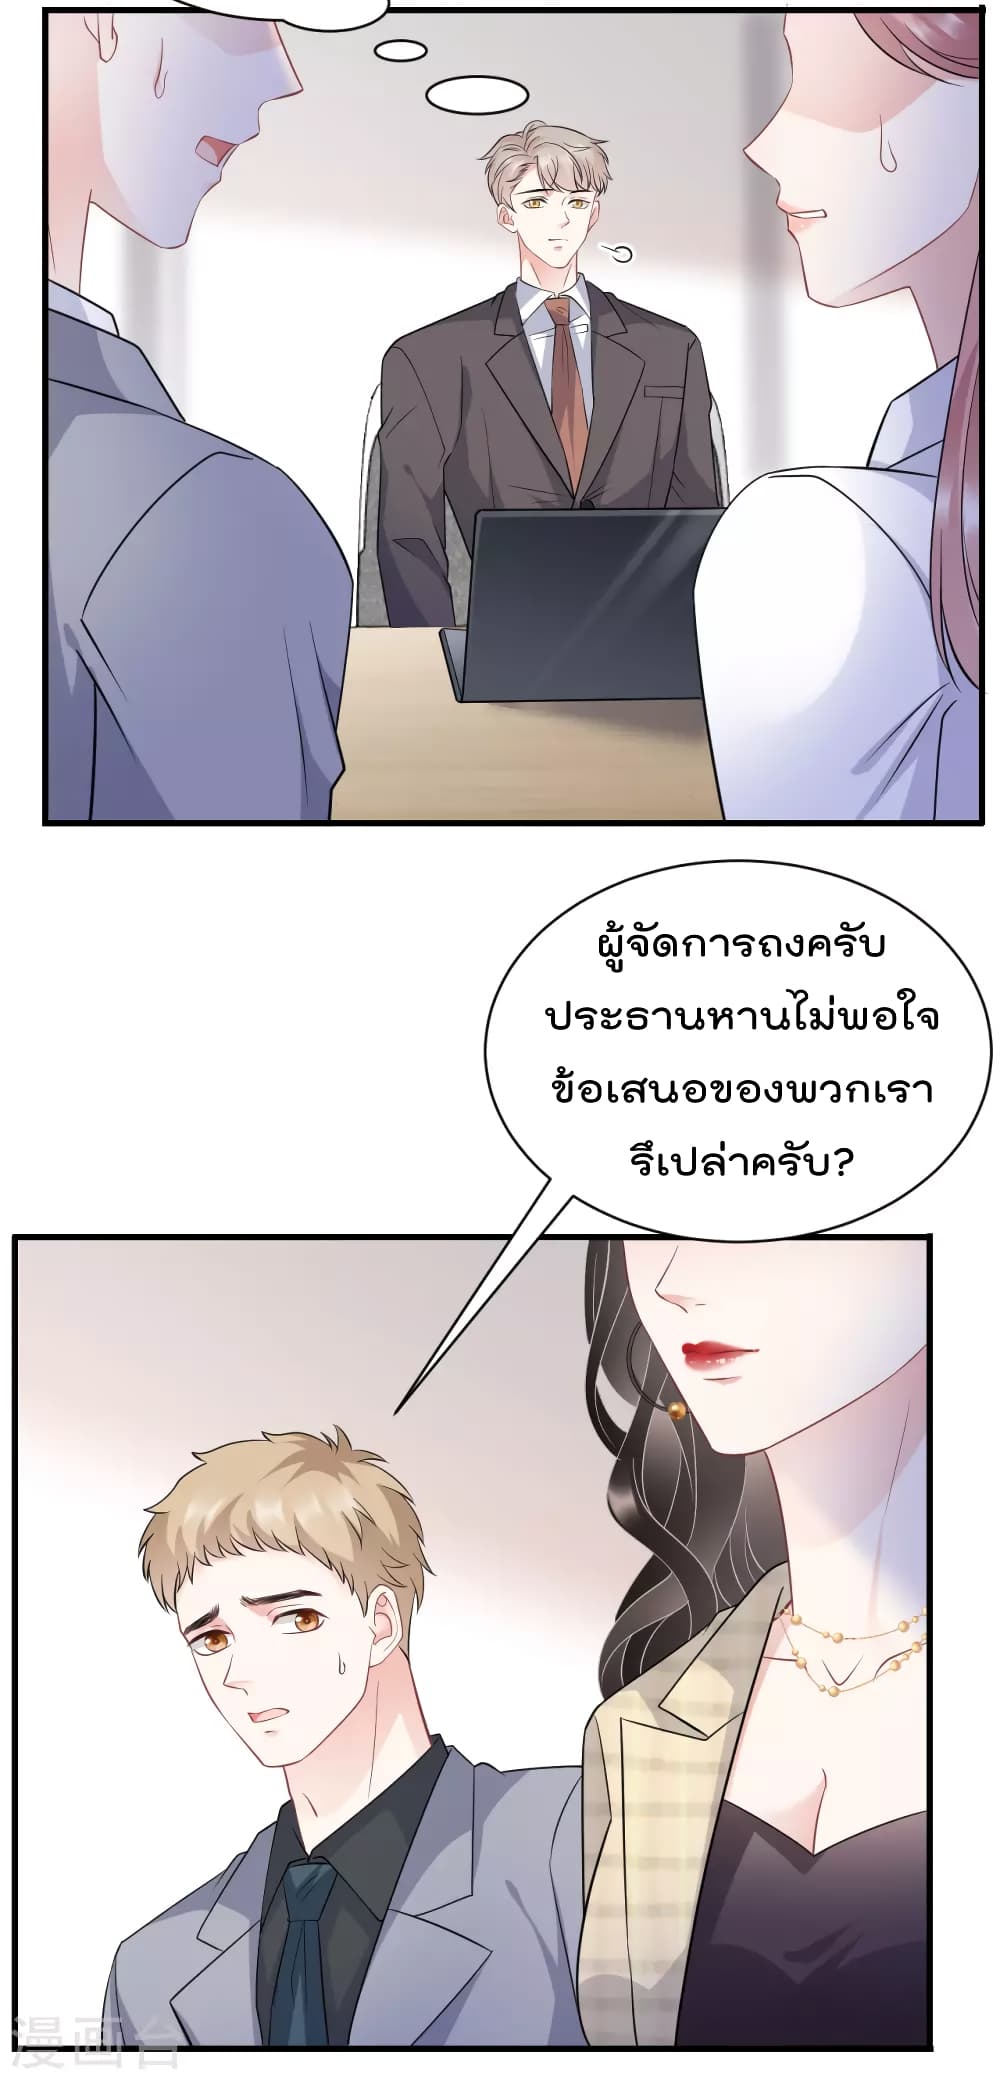 What Can the Eldest Lady Have คุณหนูใหญ่ ทำไมคุณร้ายอย่างนี้ 34-34